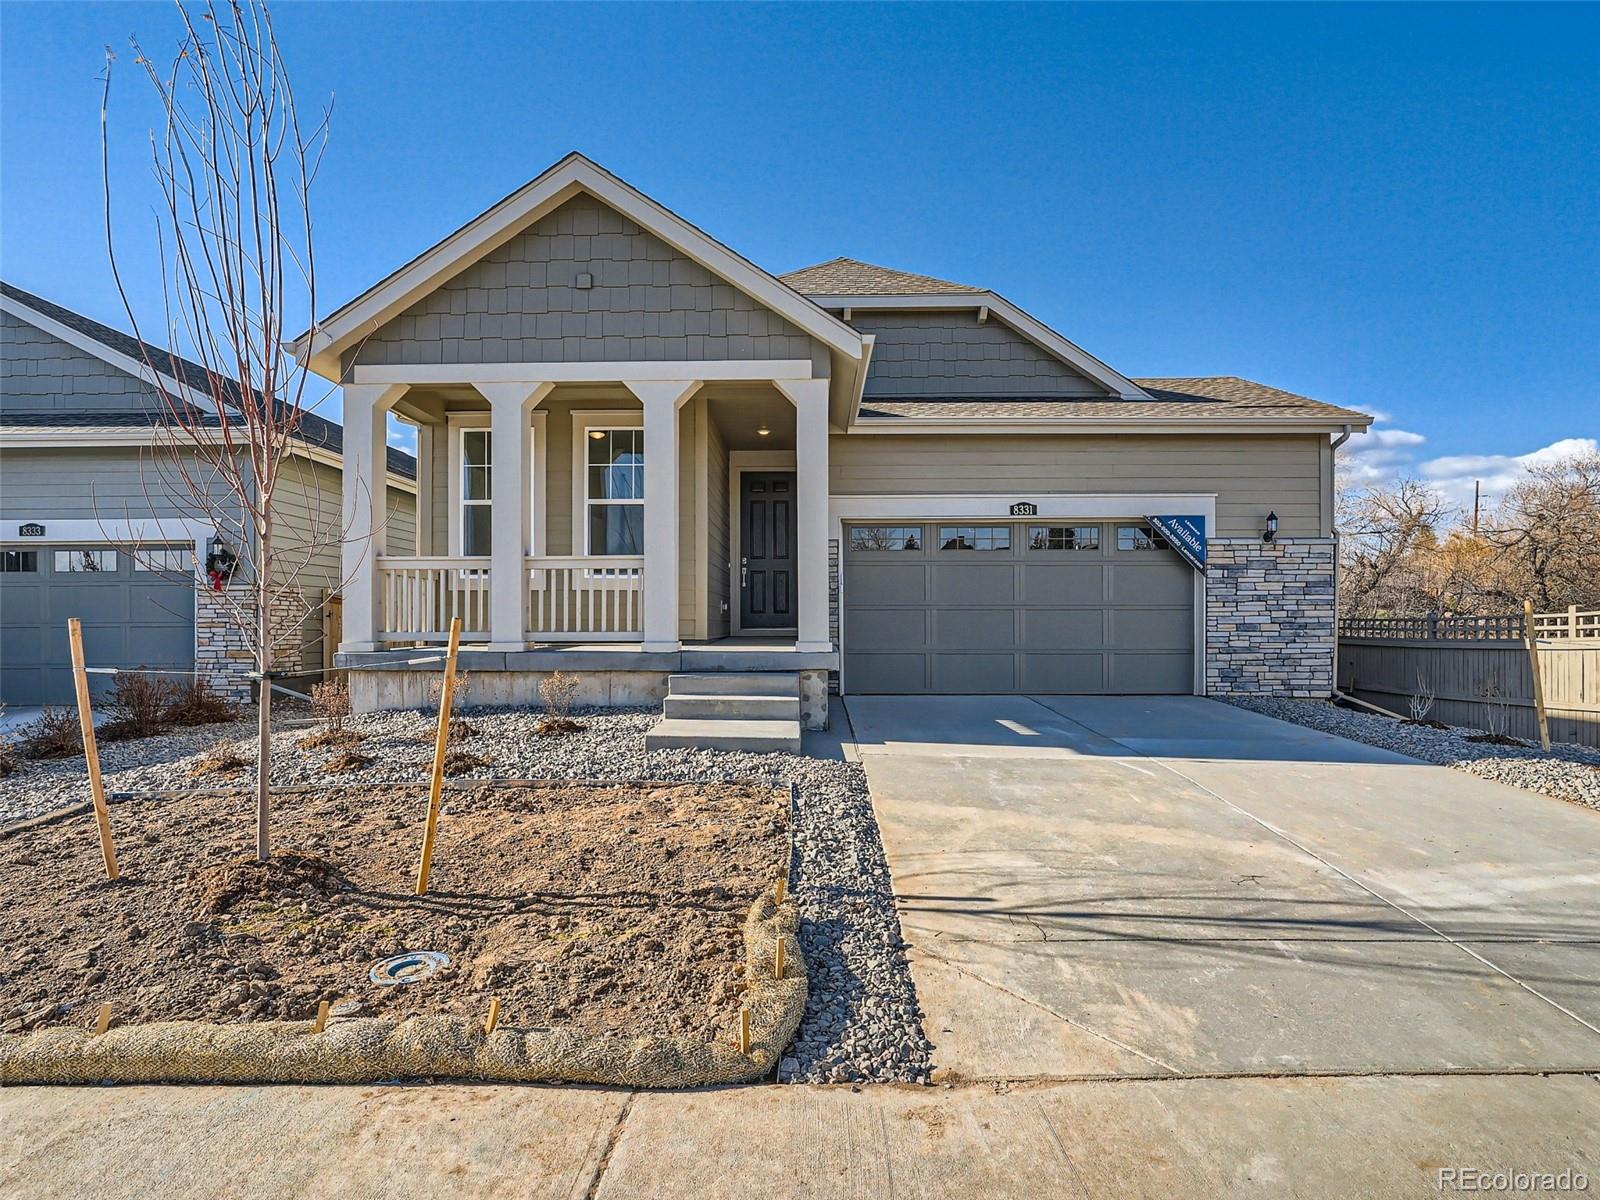 8331 s cody way, Littleton sold home. Closed on 2024-02-23 for $633,000.